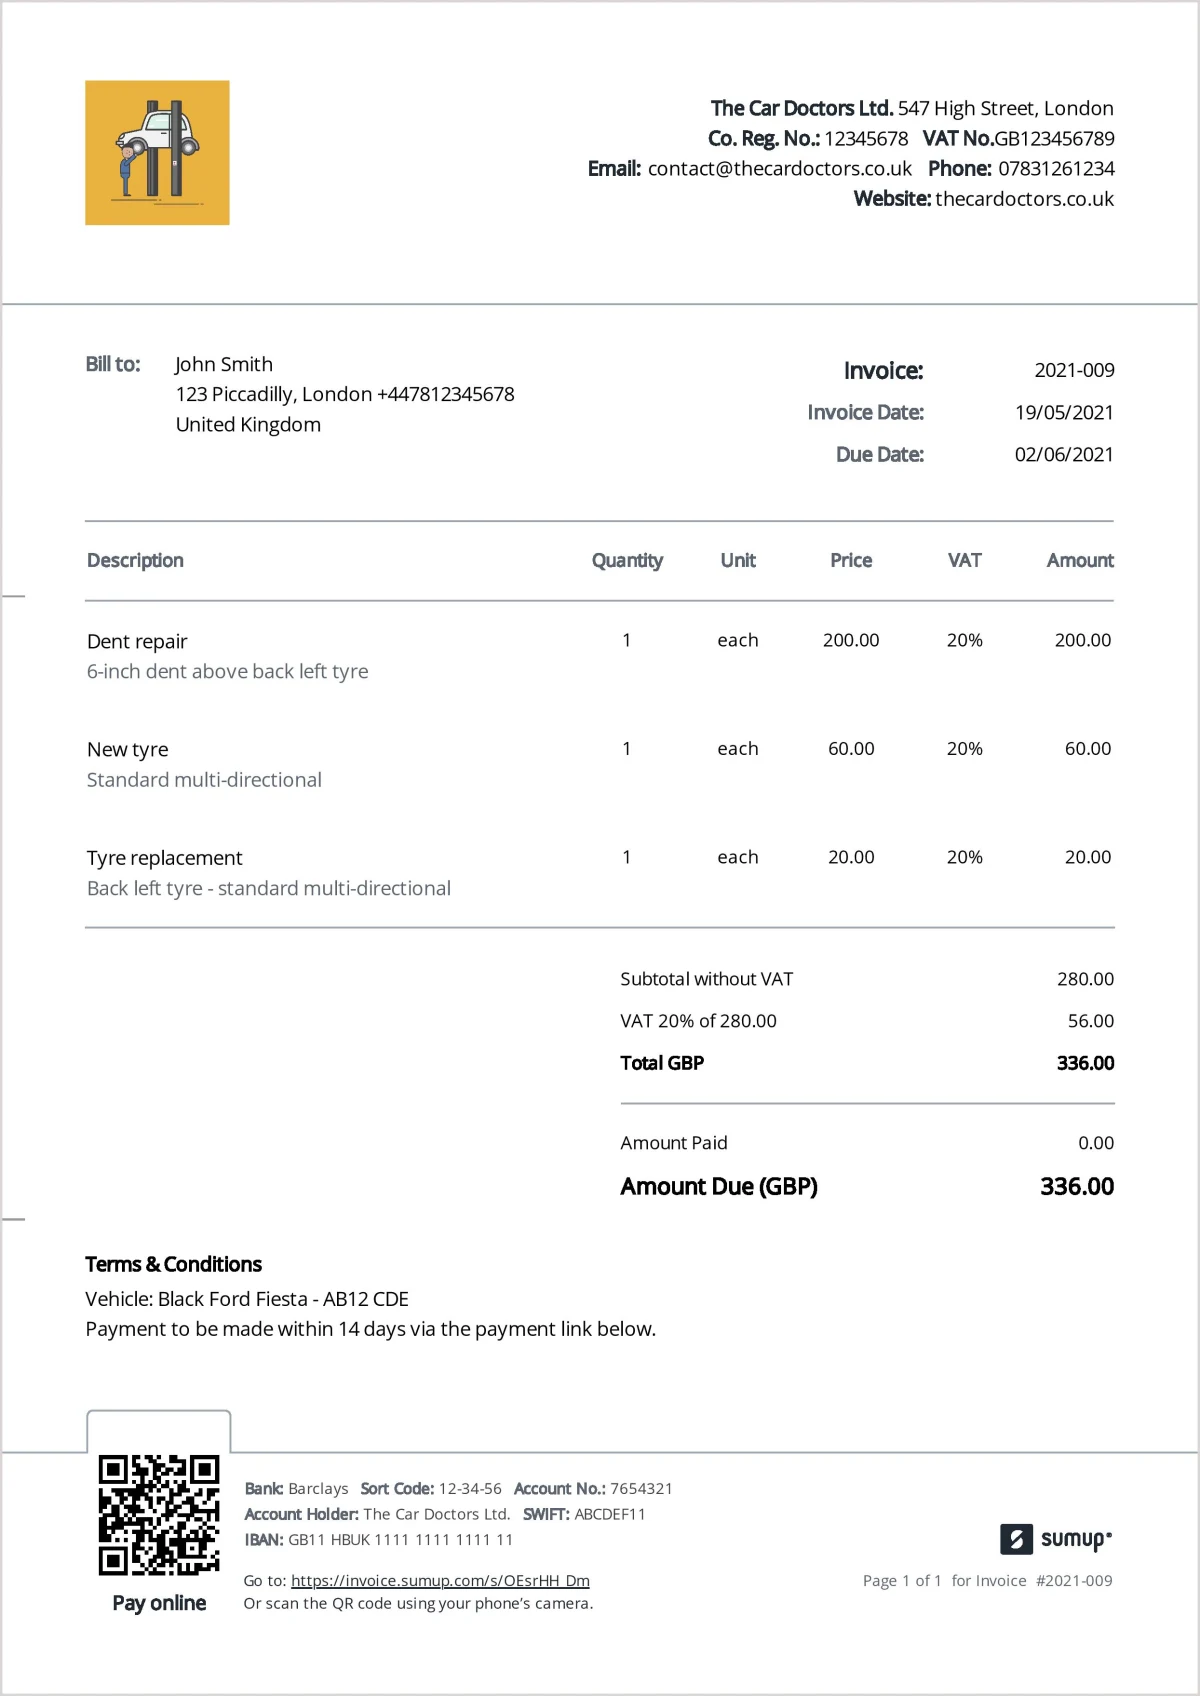 Invoice templates for auto garages  SumUp Invoices Within Garage Repair Invoice Template